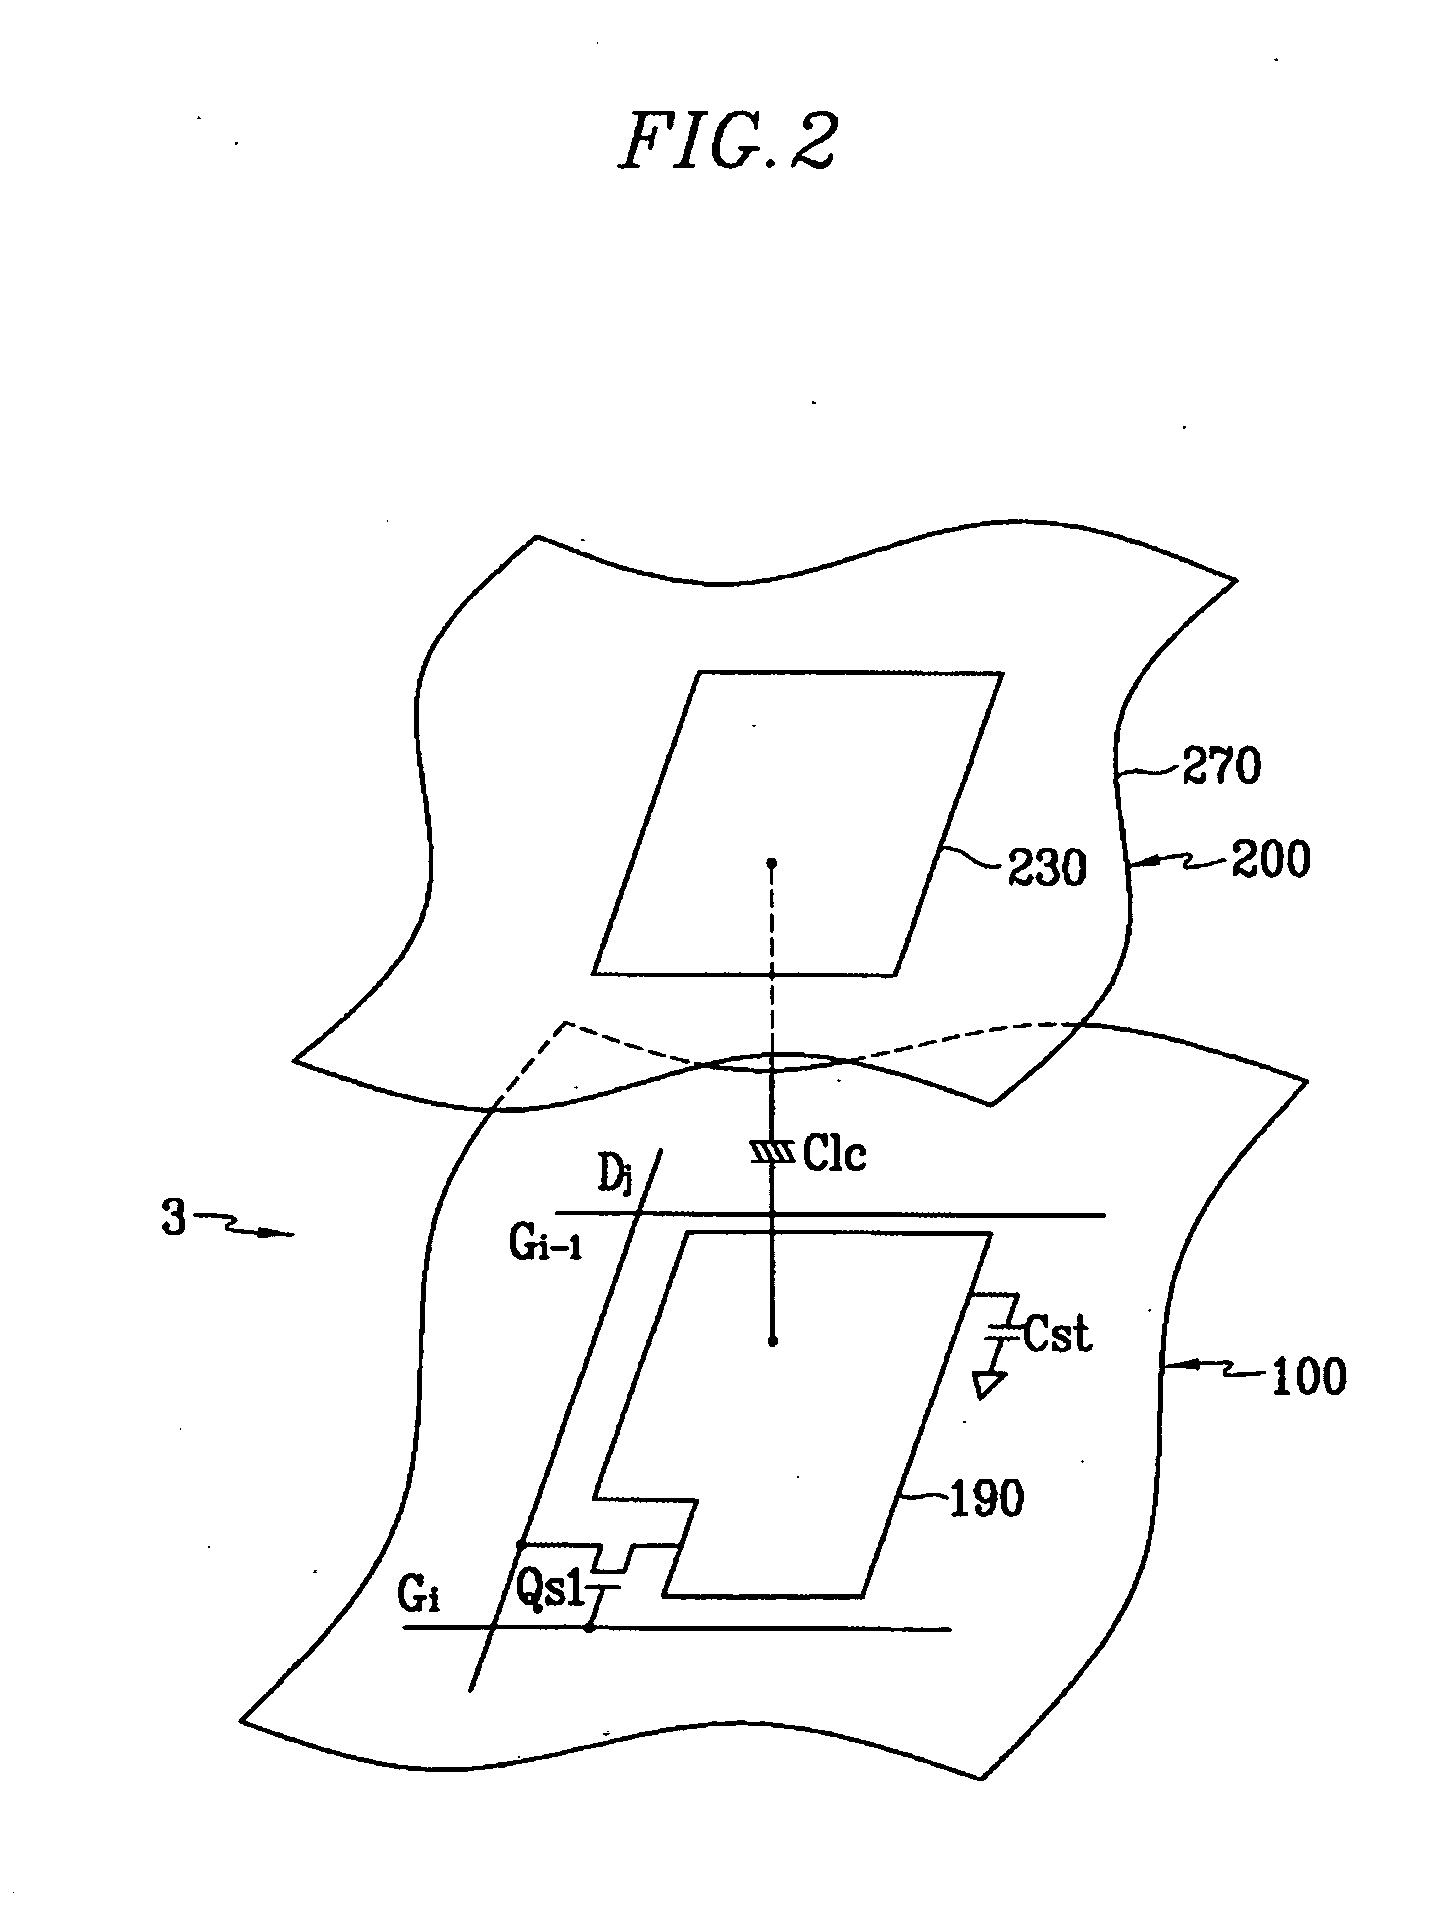 Display device including sensing elements